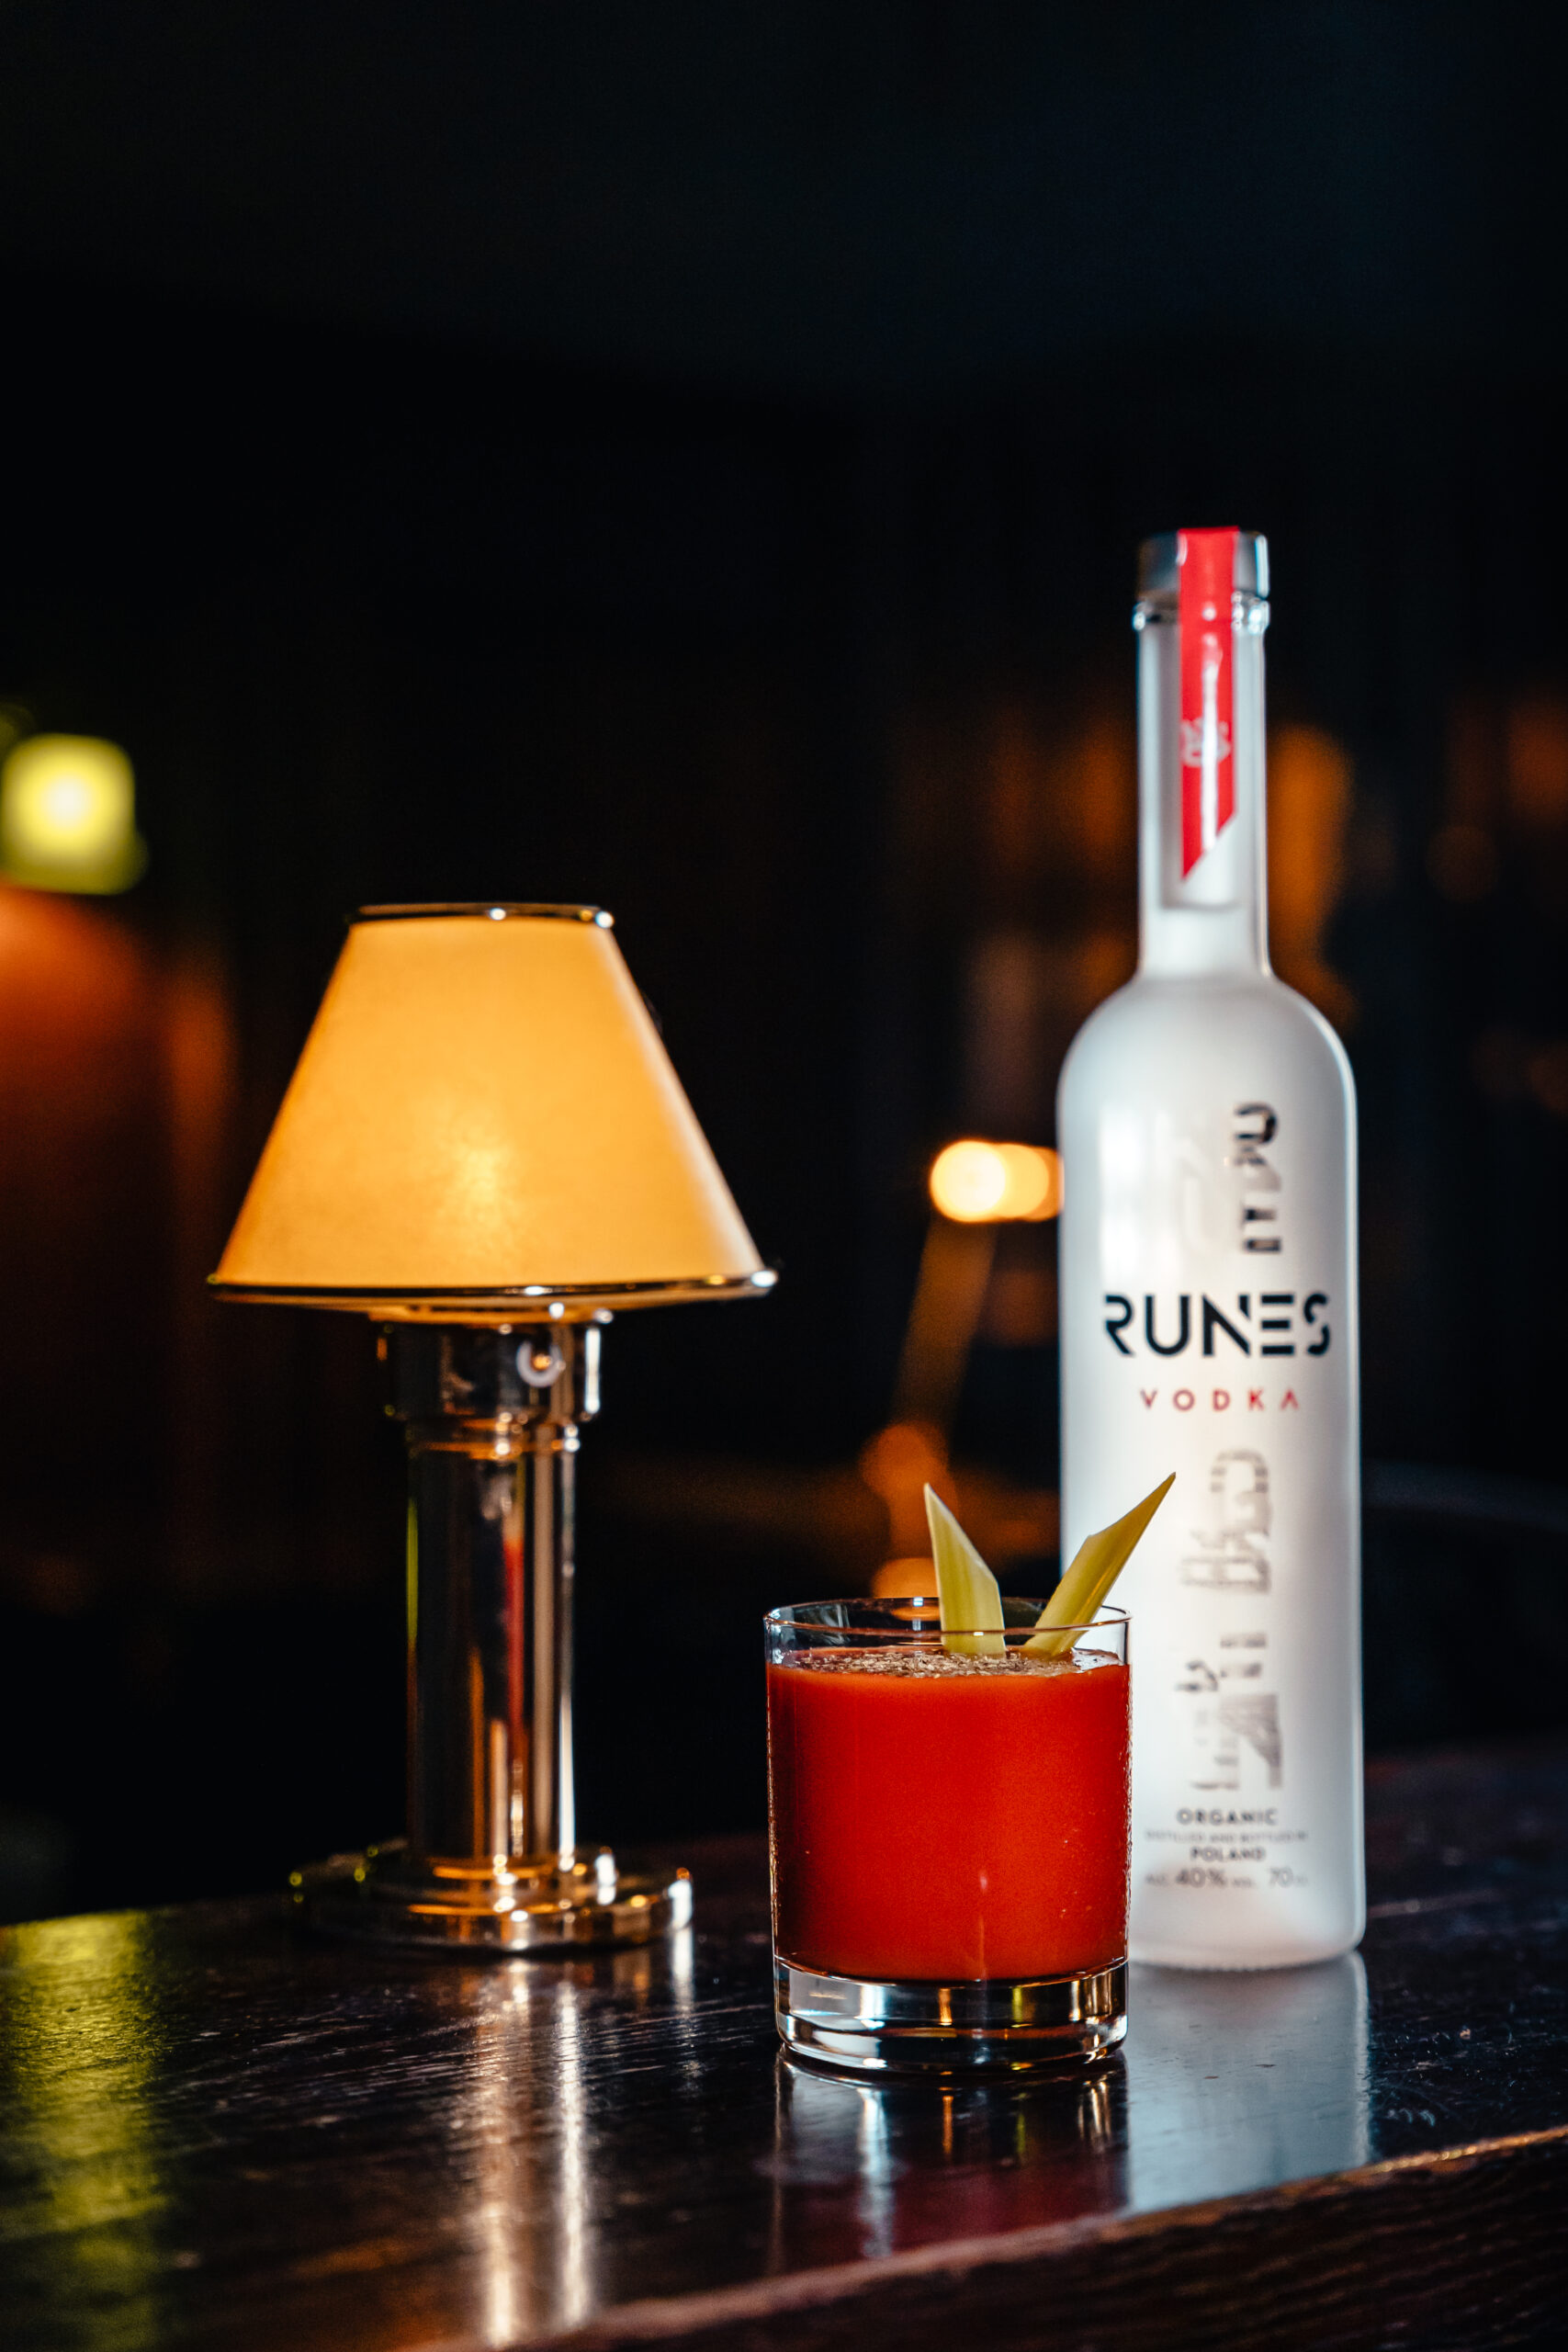 Bloody Mary is a classic cocktail made from vodka, tomato juice and seasonings. With RUNES Vodka it gets its particularly mild taste.